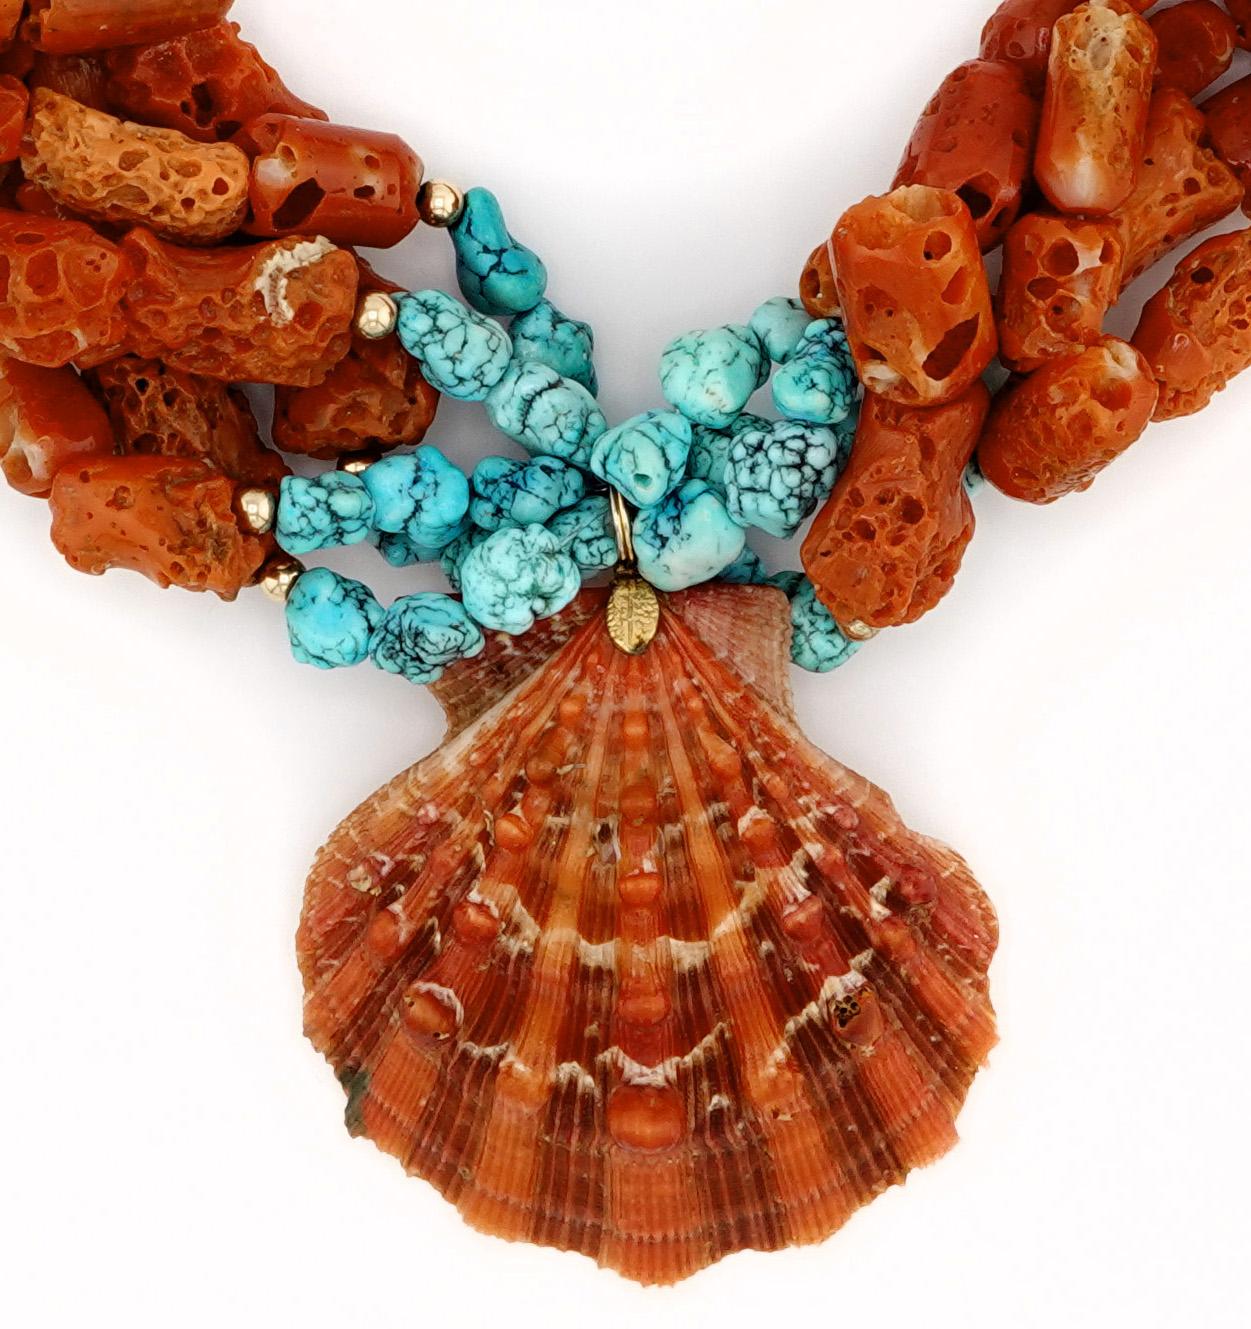 What makes this vintage Helga Wagner necklace particularly special is its rarity. Coral jewelry has become increasingly scarce due to restrictions on international trade. While it remains legal to sell or purchase, importing coral is now prohibited.